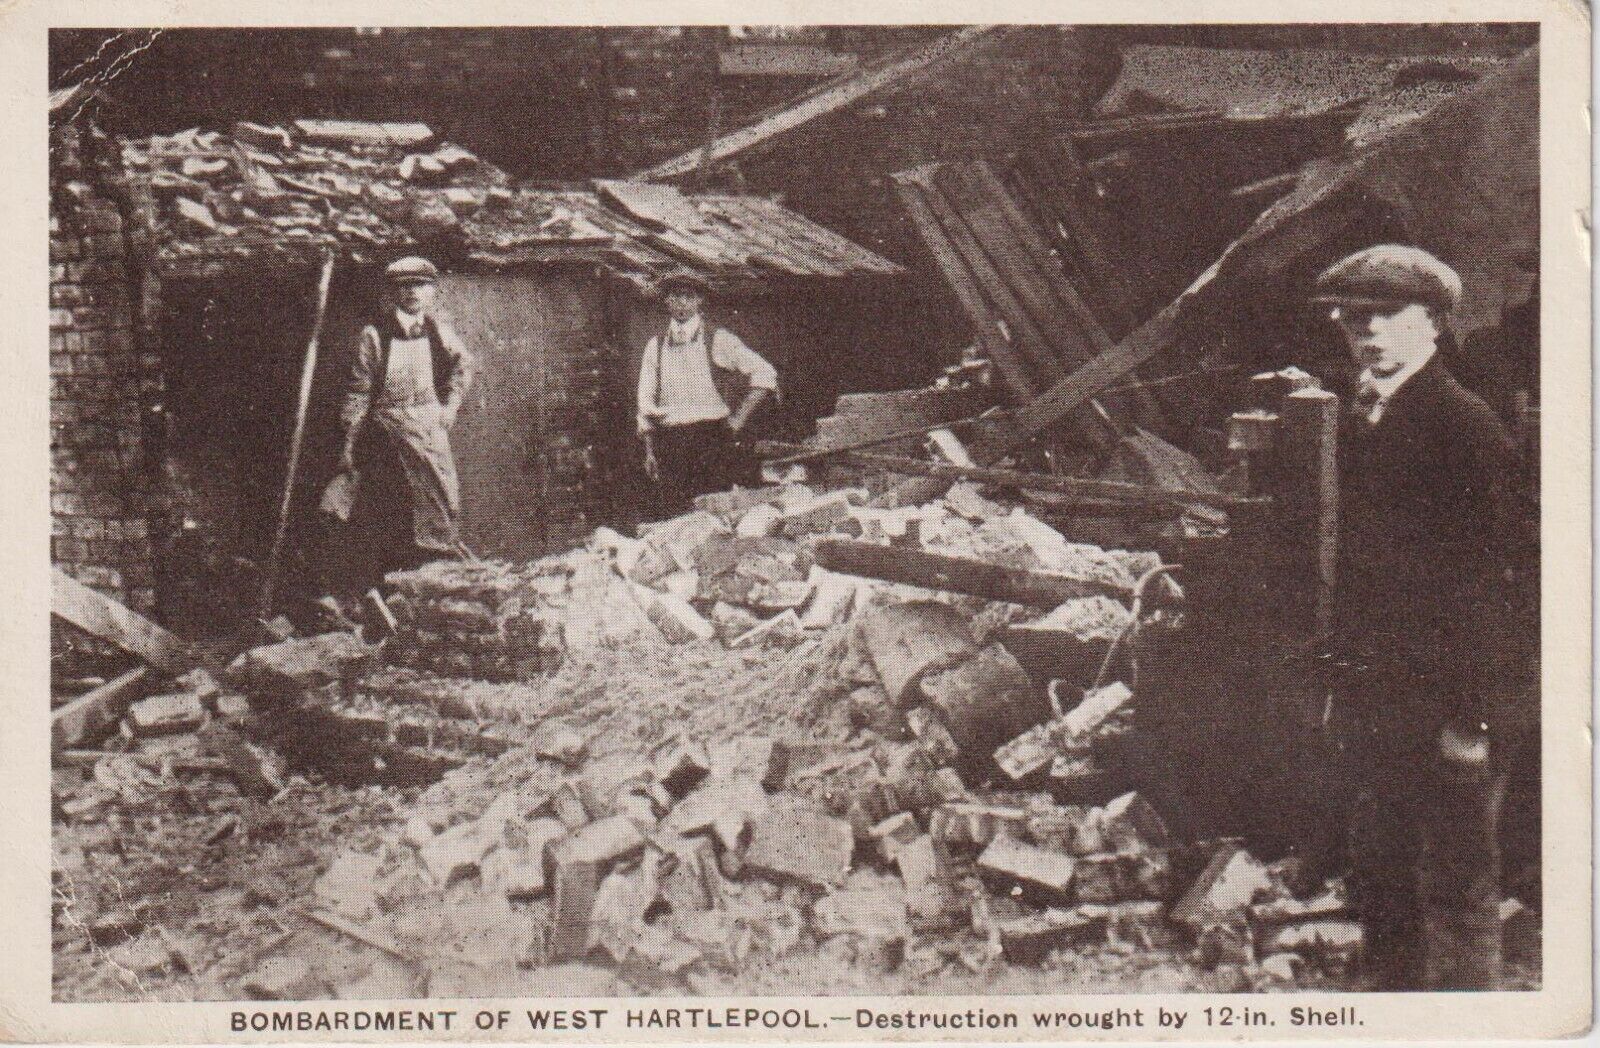 House Clearance - Service of West Hartlepool destruction after 1914 Bombardment